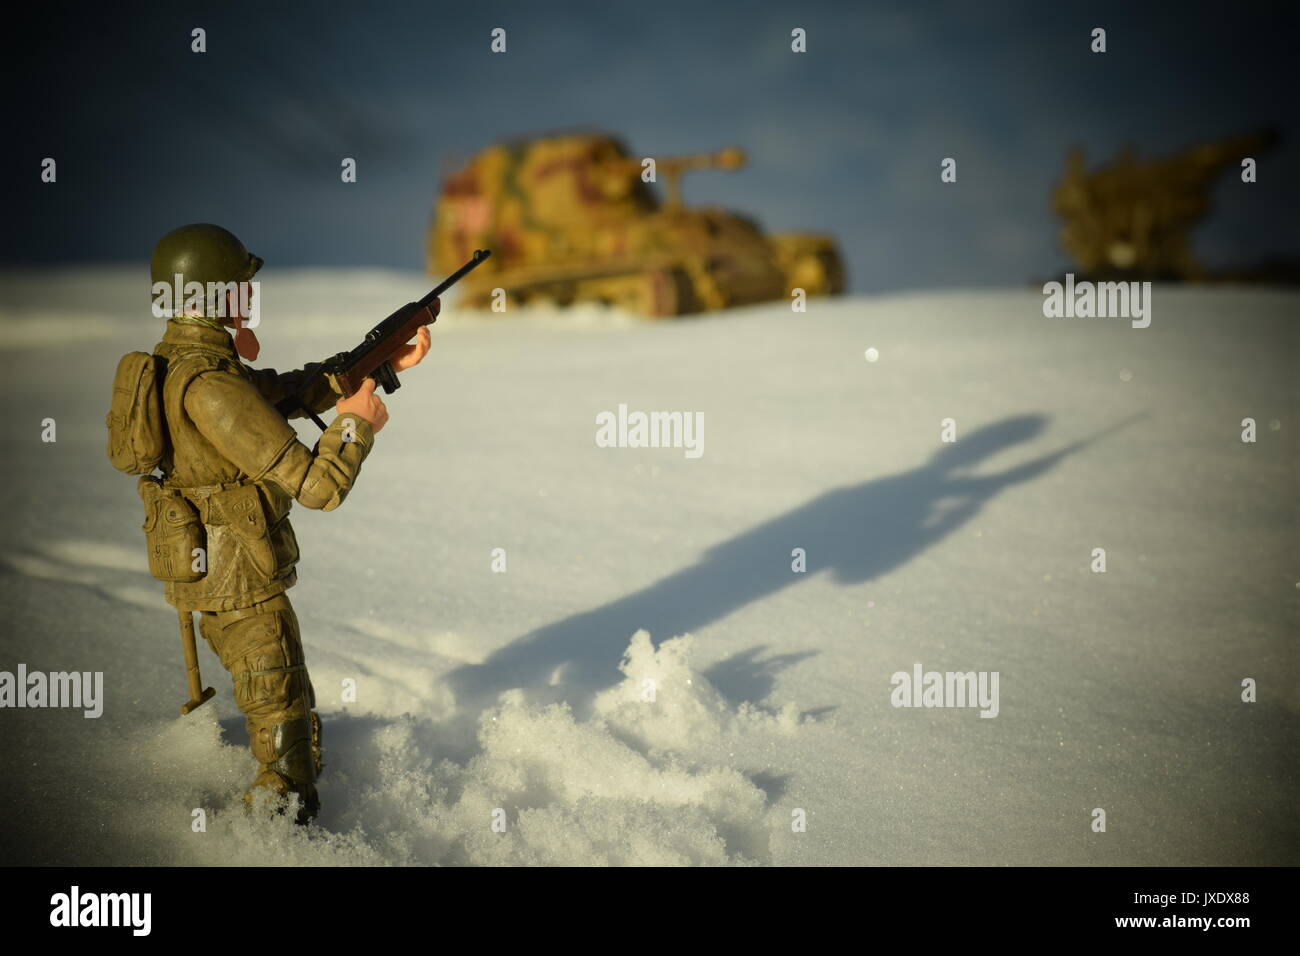 Toy Soldier in snow Banque D'Images